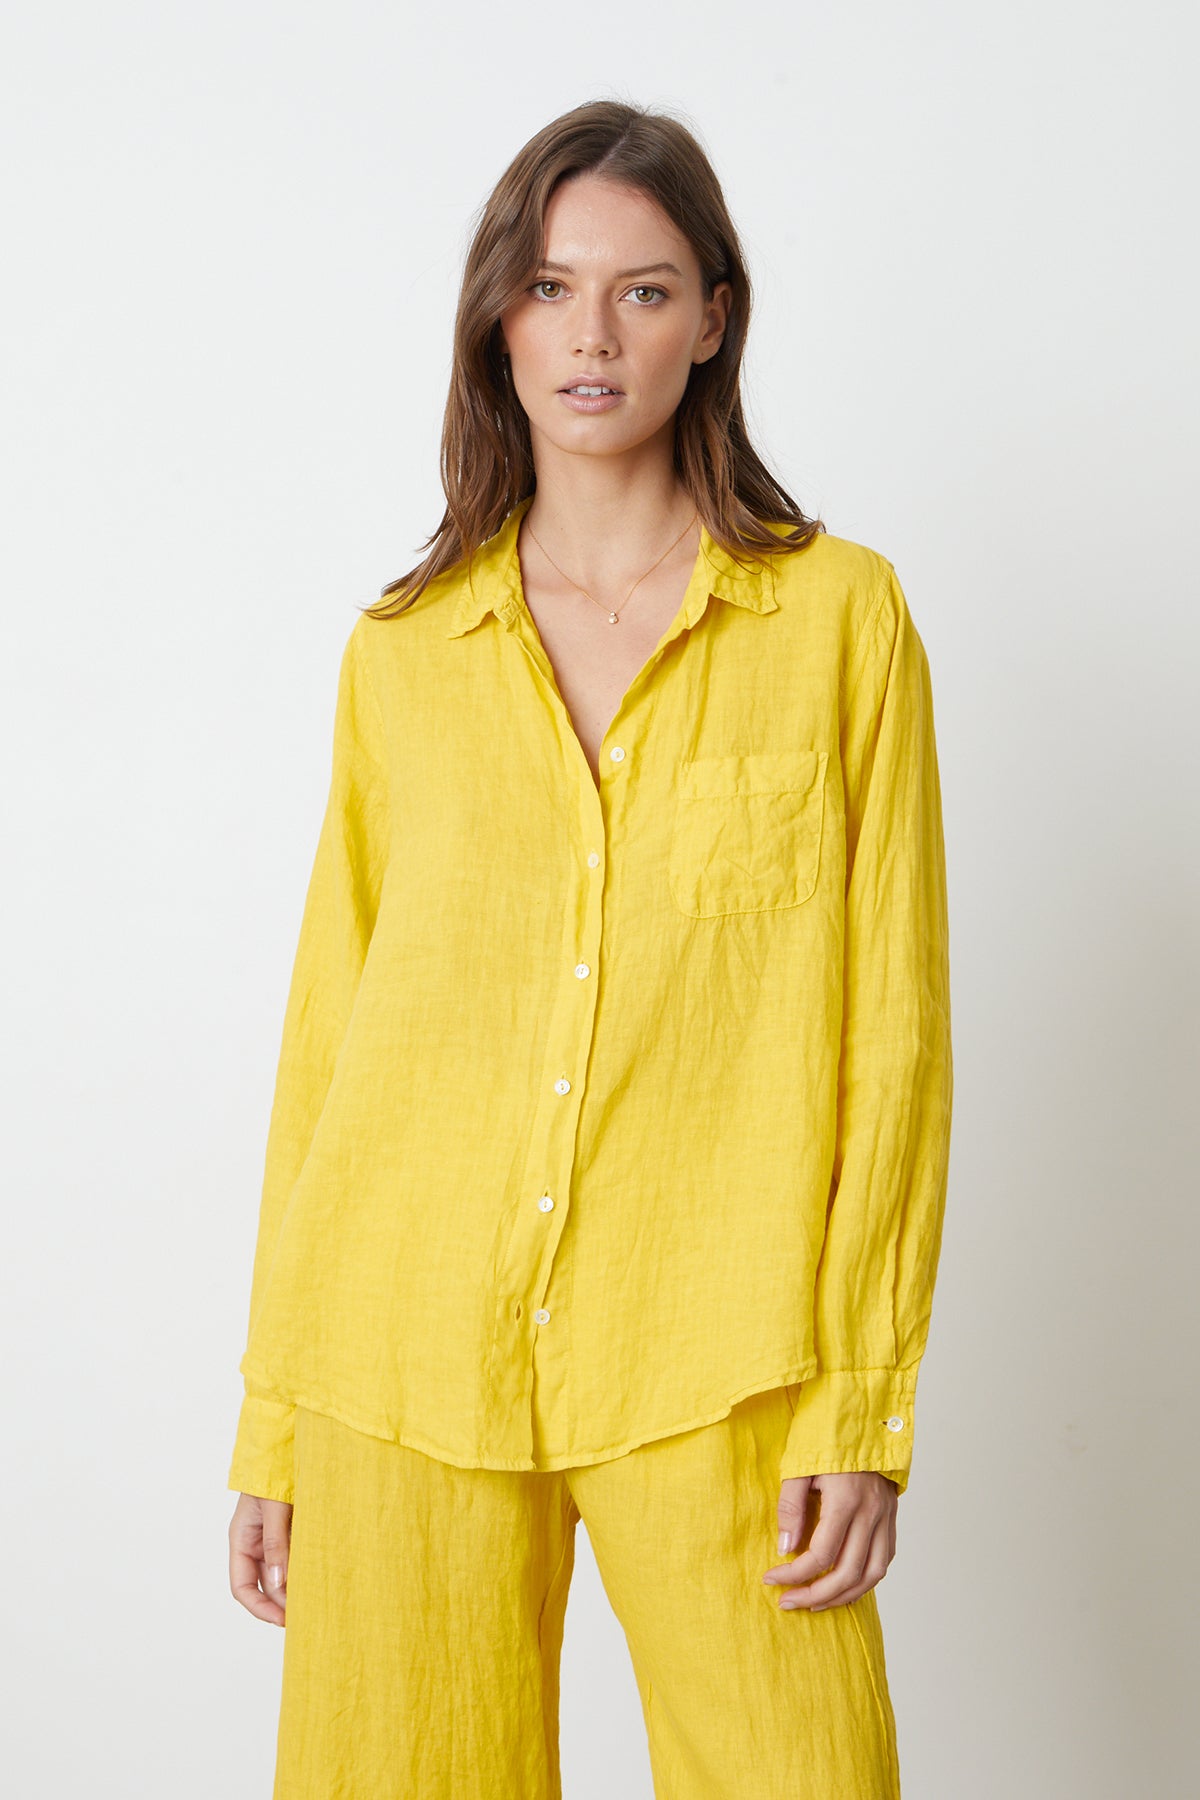   Natalia Button-Up Shirt in bright yellow sun colored linen with Lola pant front 